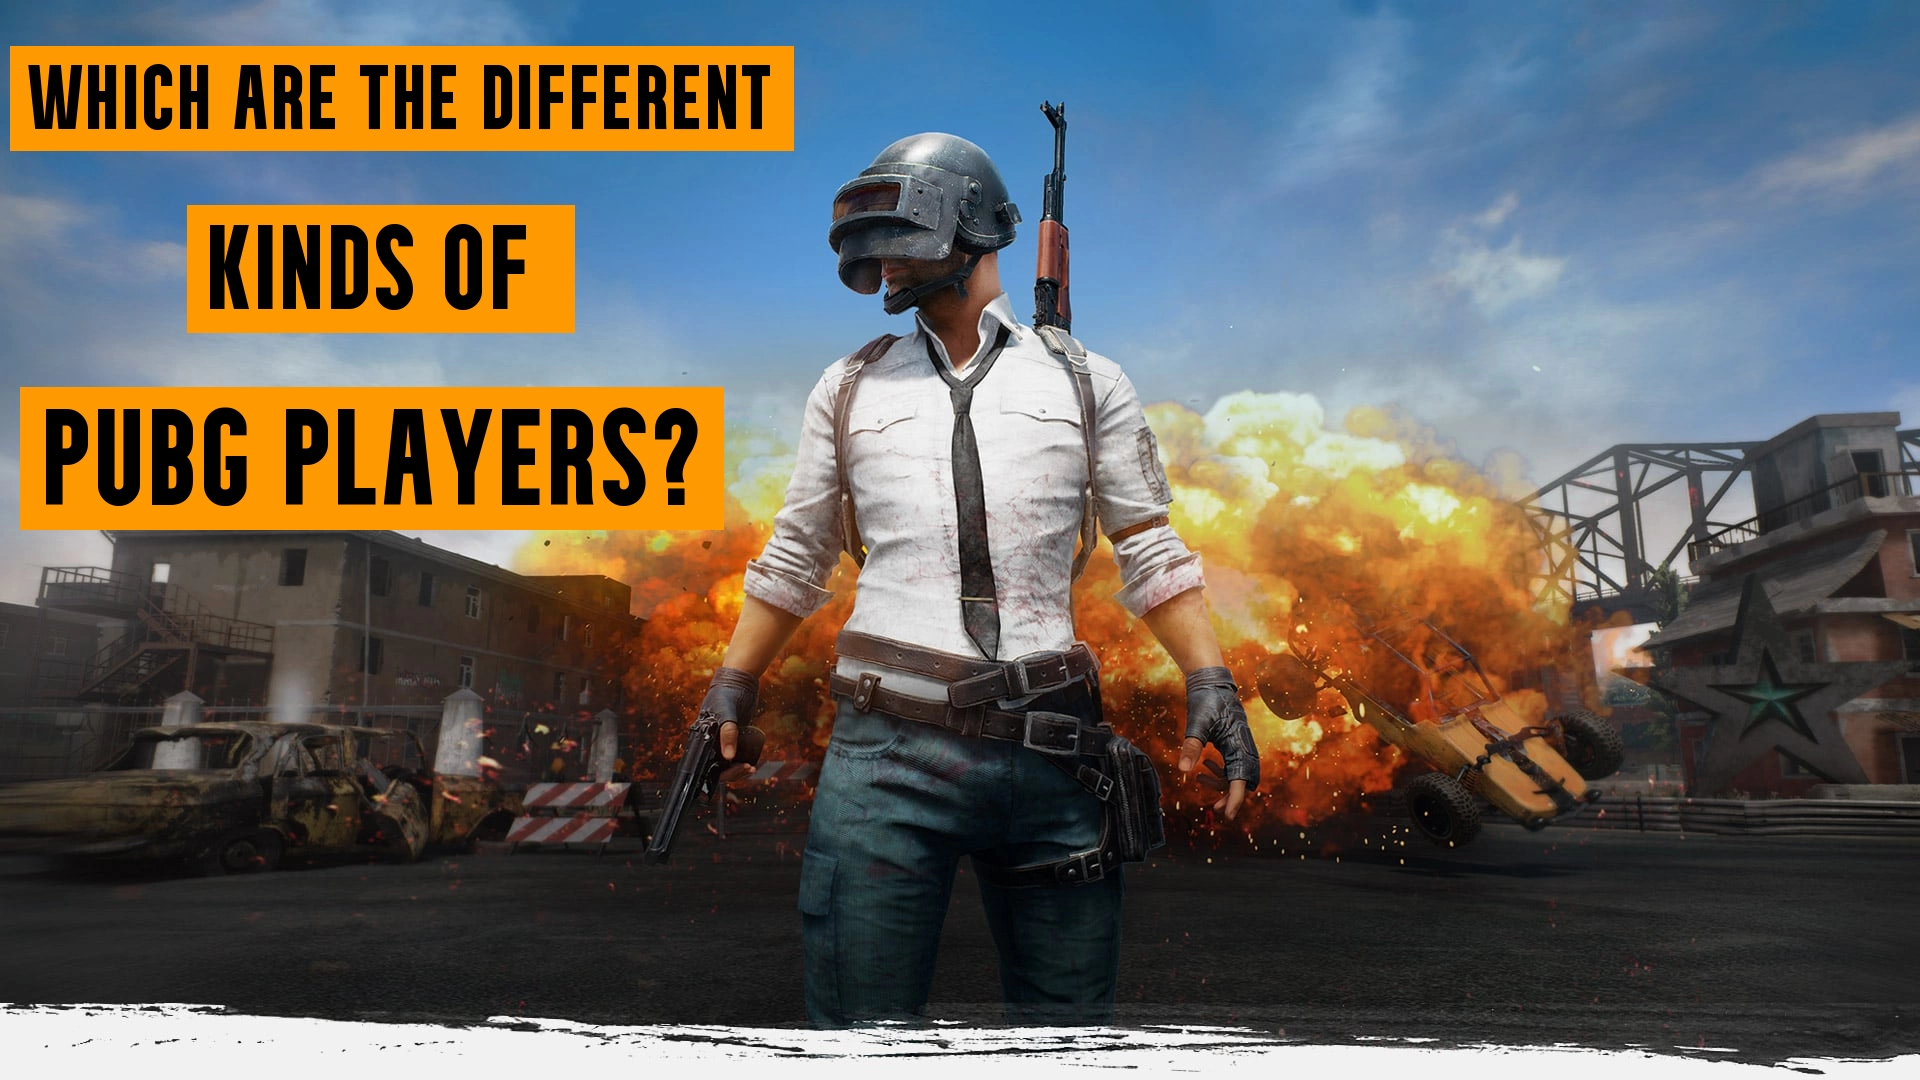 Which are the Different Kinds of PUBG Players?